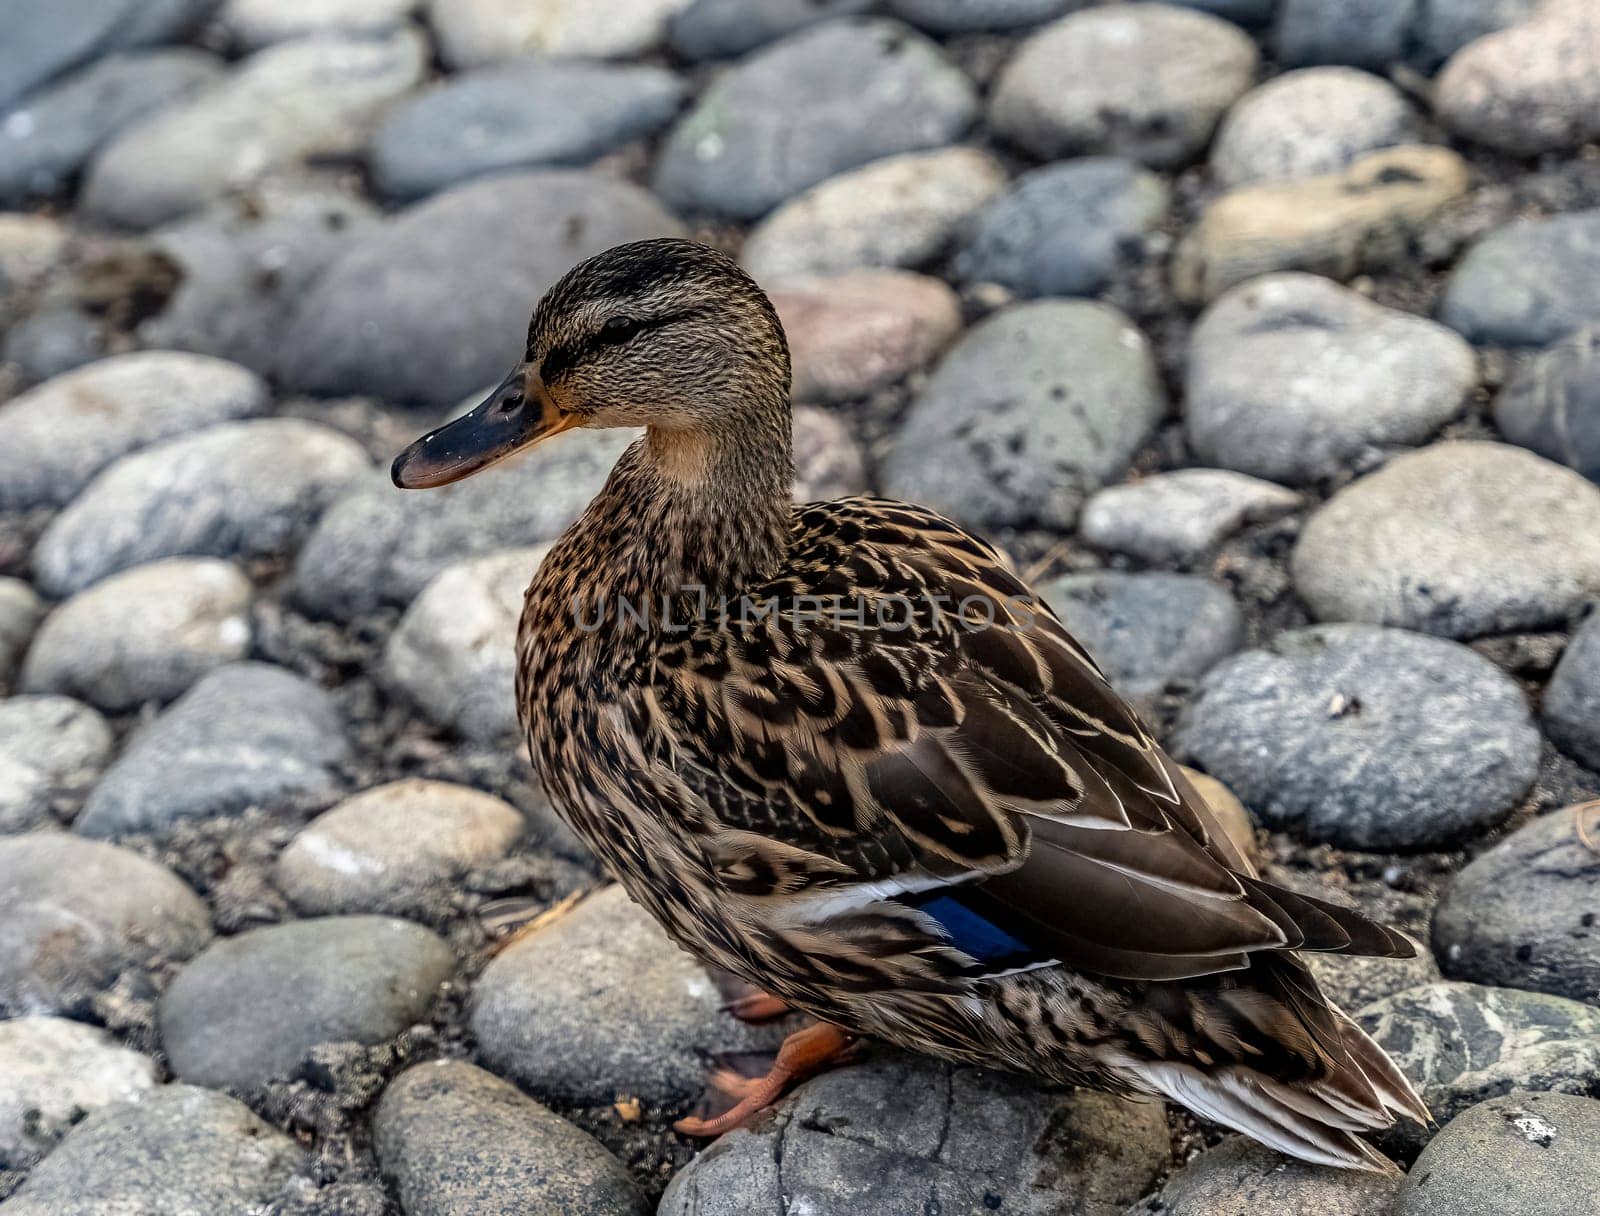 Wild duck standing on gray stones. High quality photo.